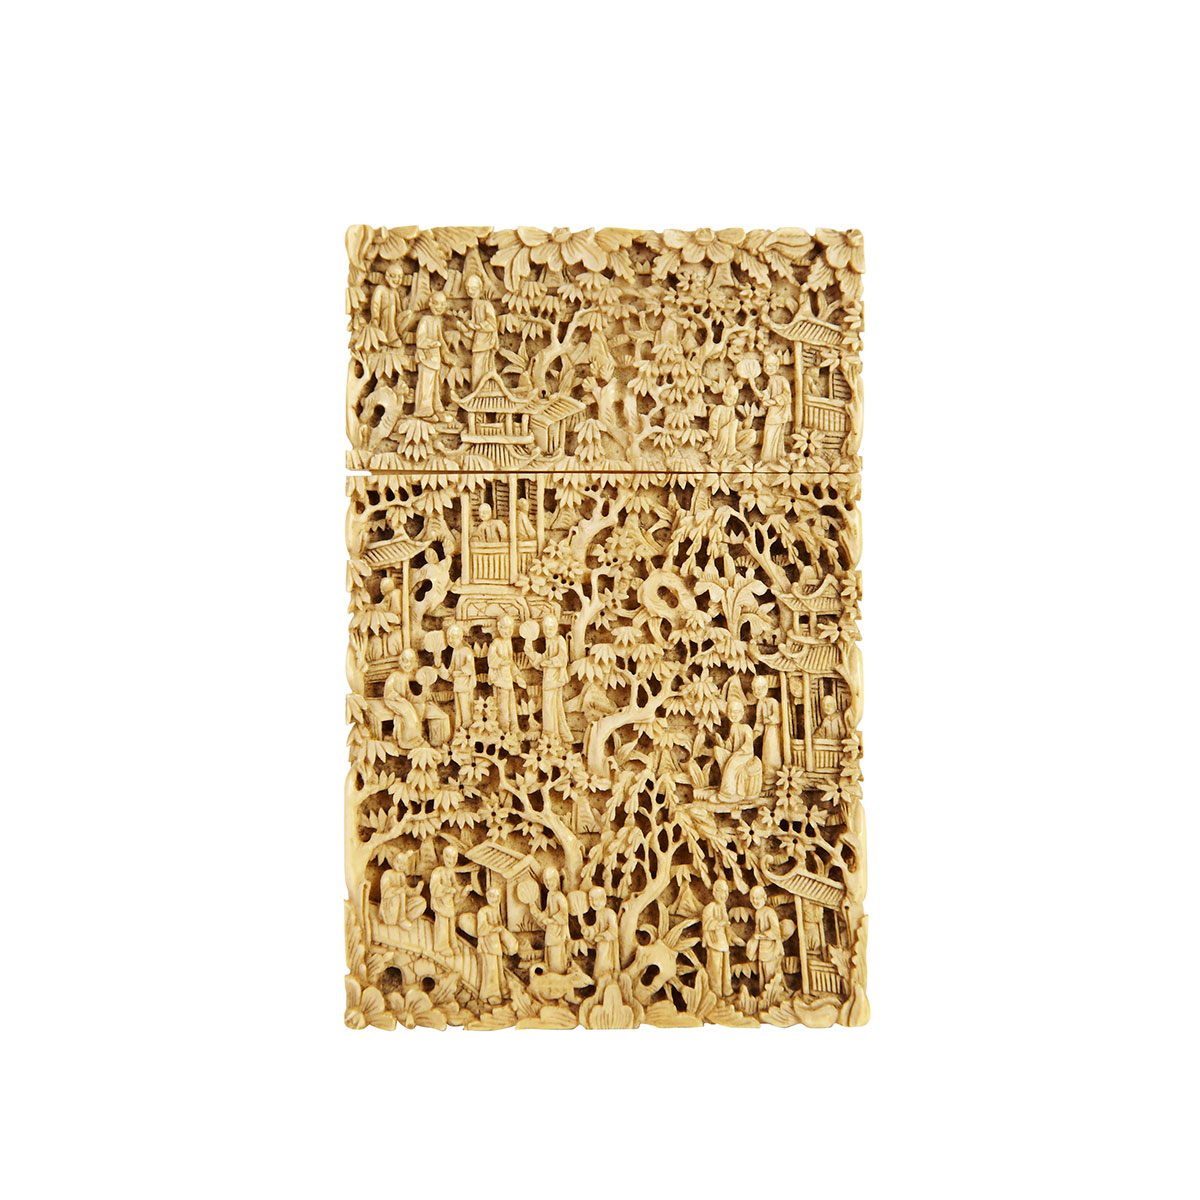 Export Ivory Card Case 19th Century